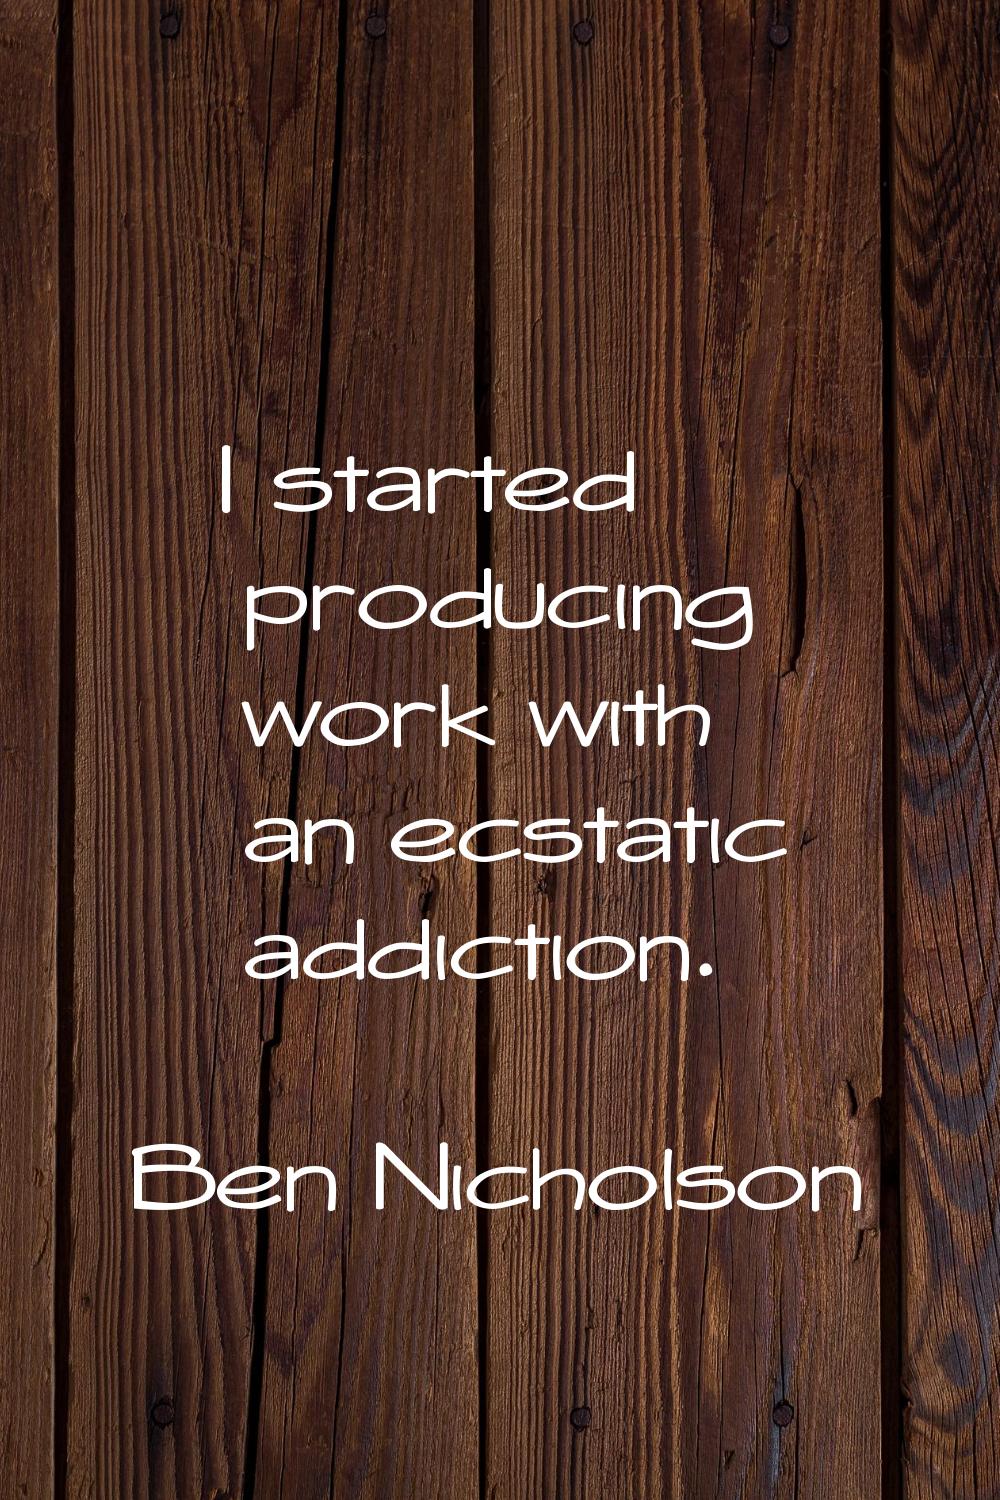 I started producing work with an ecstatic addiction.